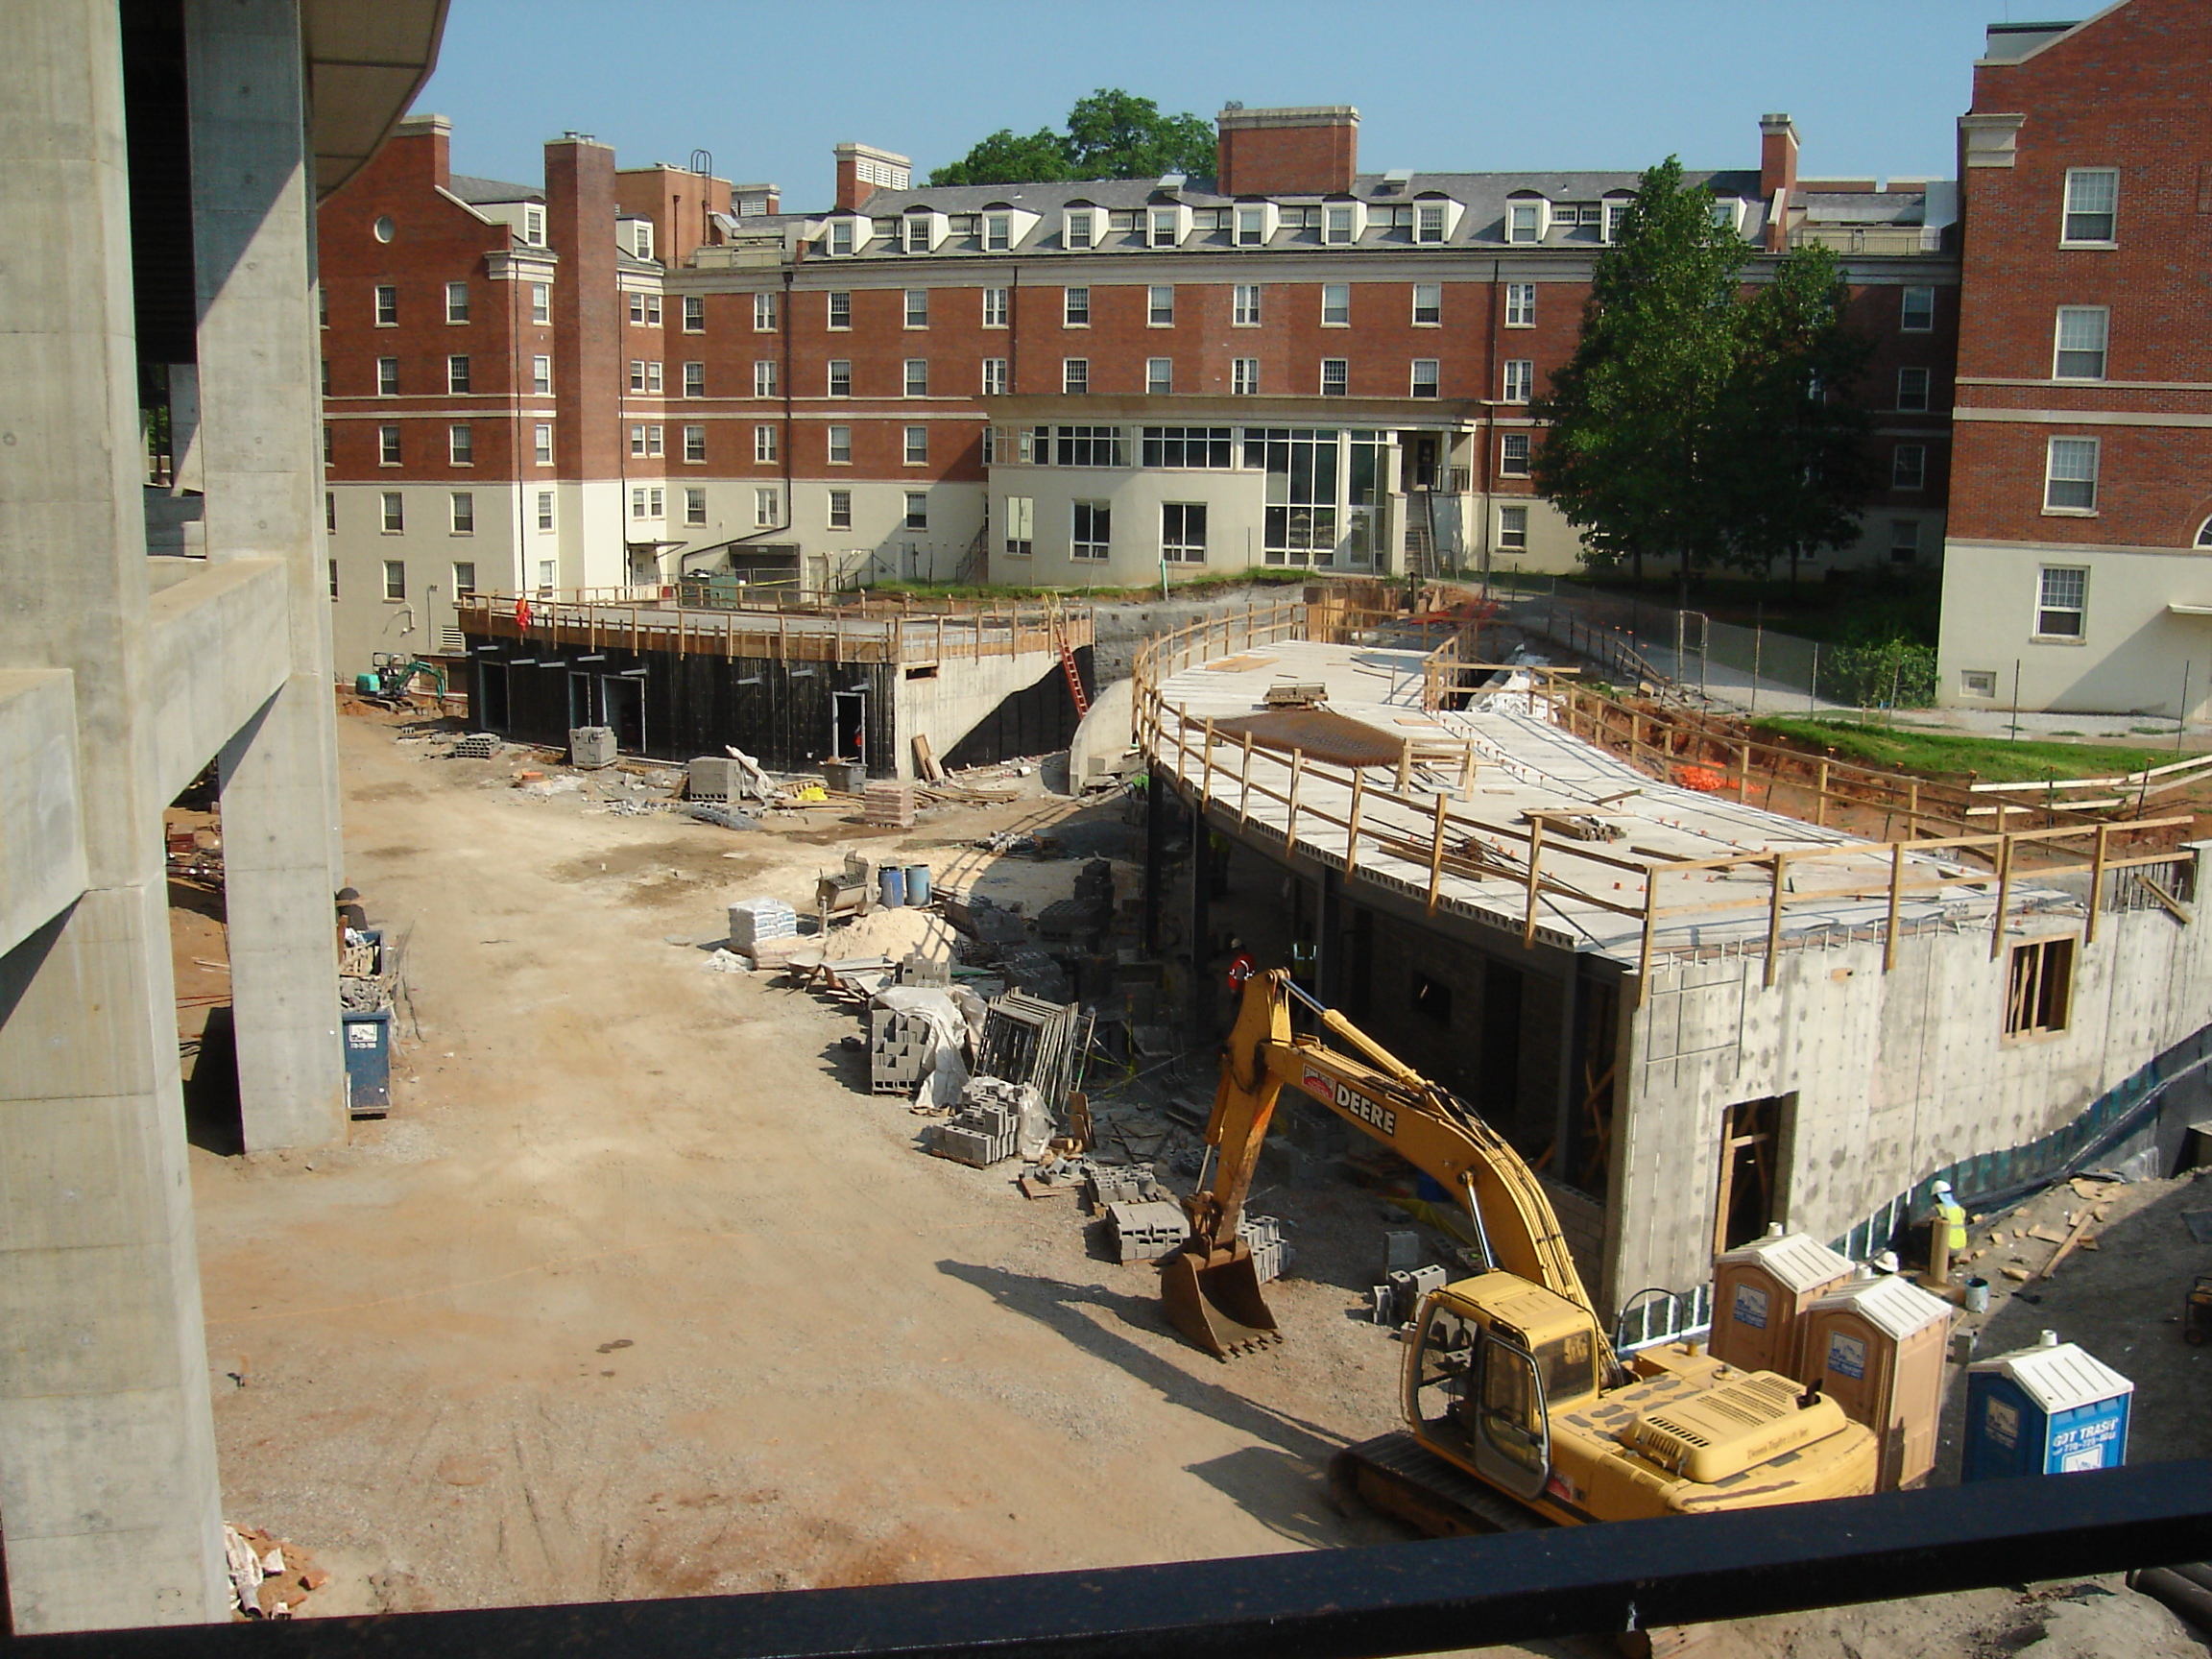 Construction Phase, June 2010